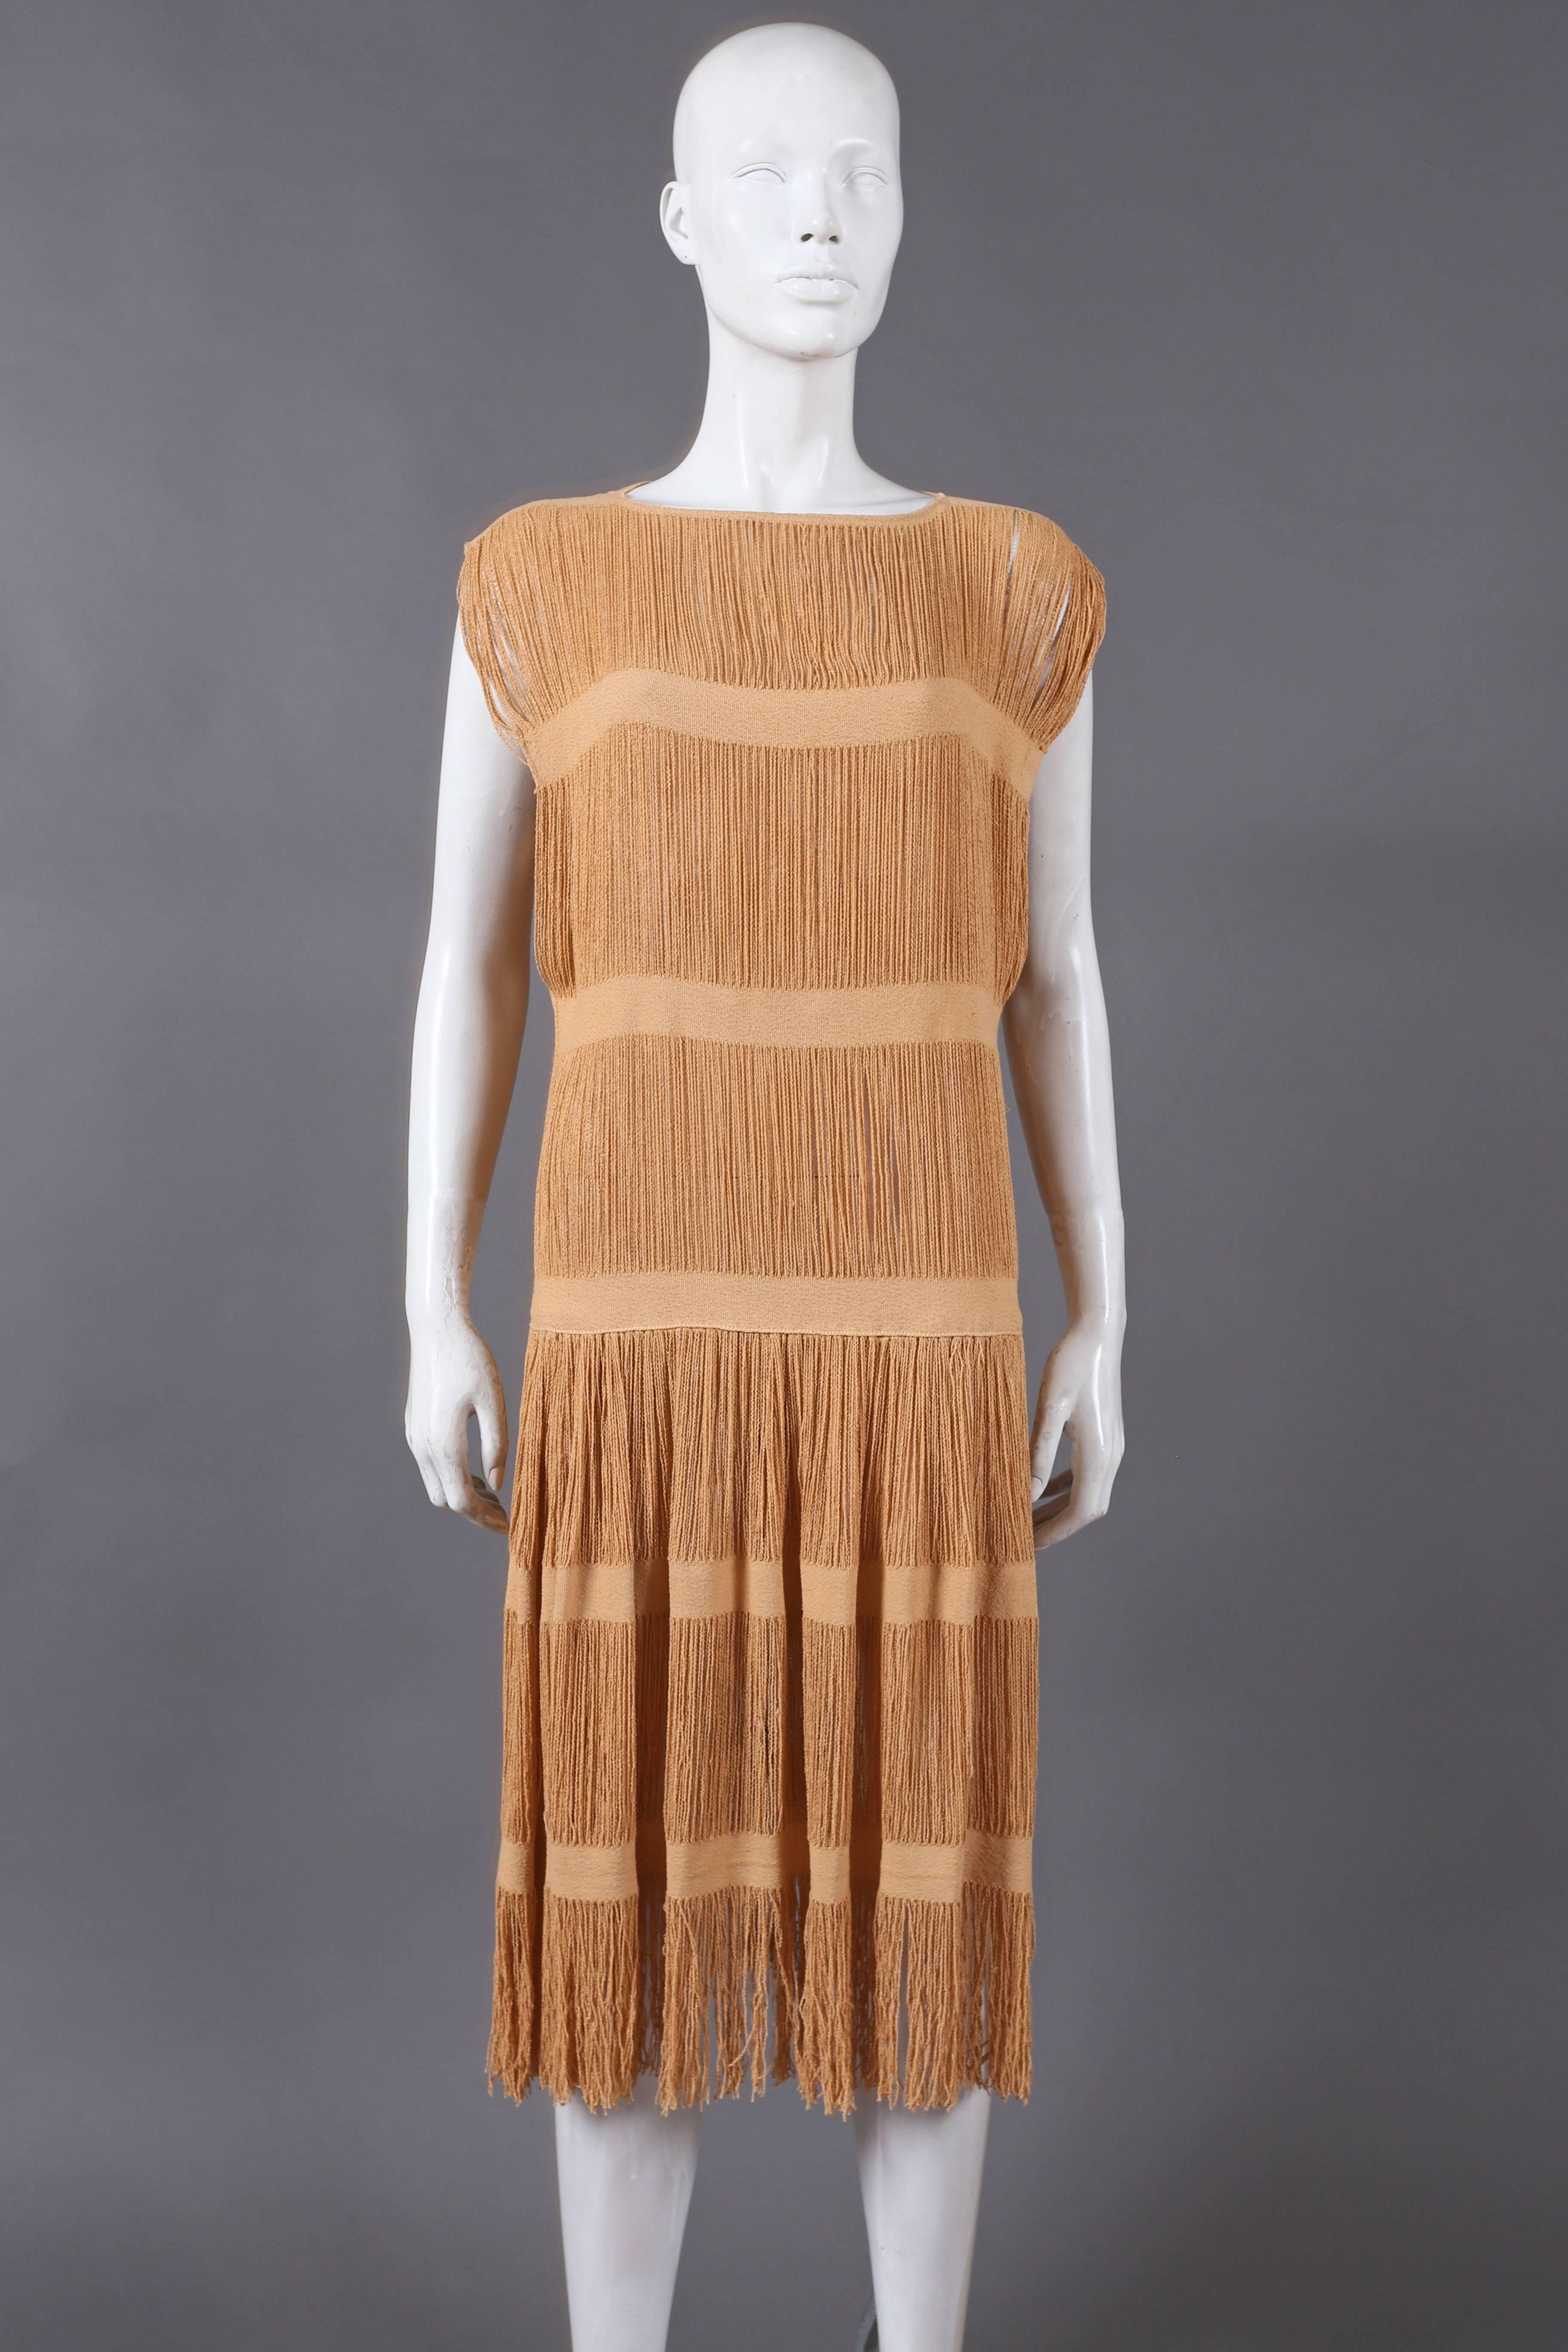 A beautiful linen flapper dress from the 1920s. The dress features 6 lien bands, fringed hem, high side slits and drop waist.

size small